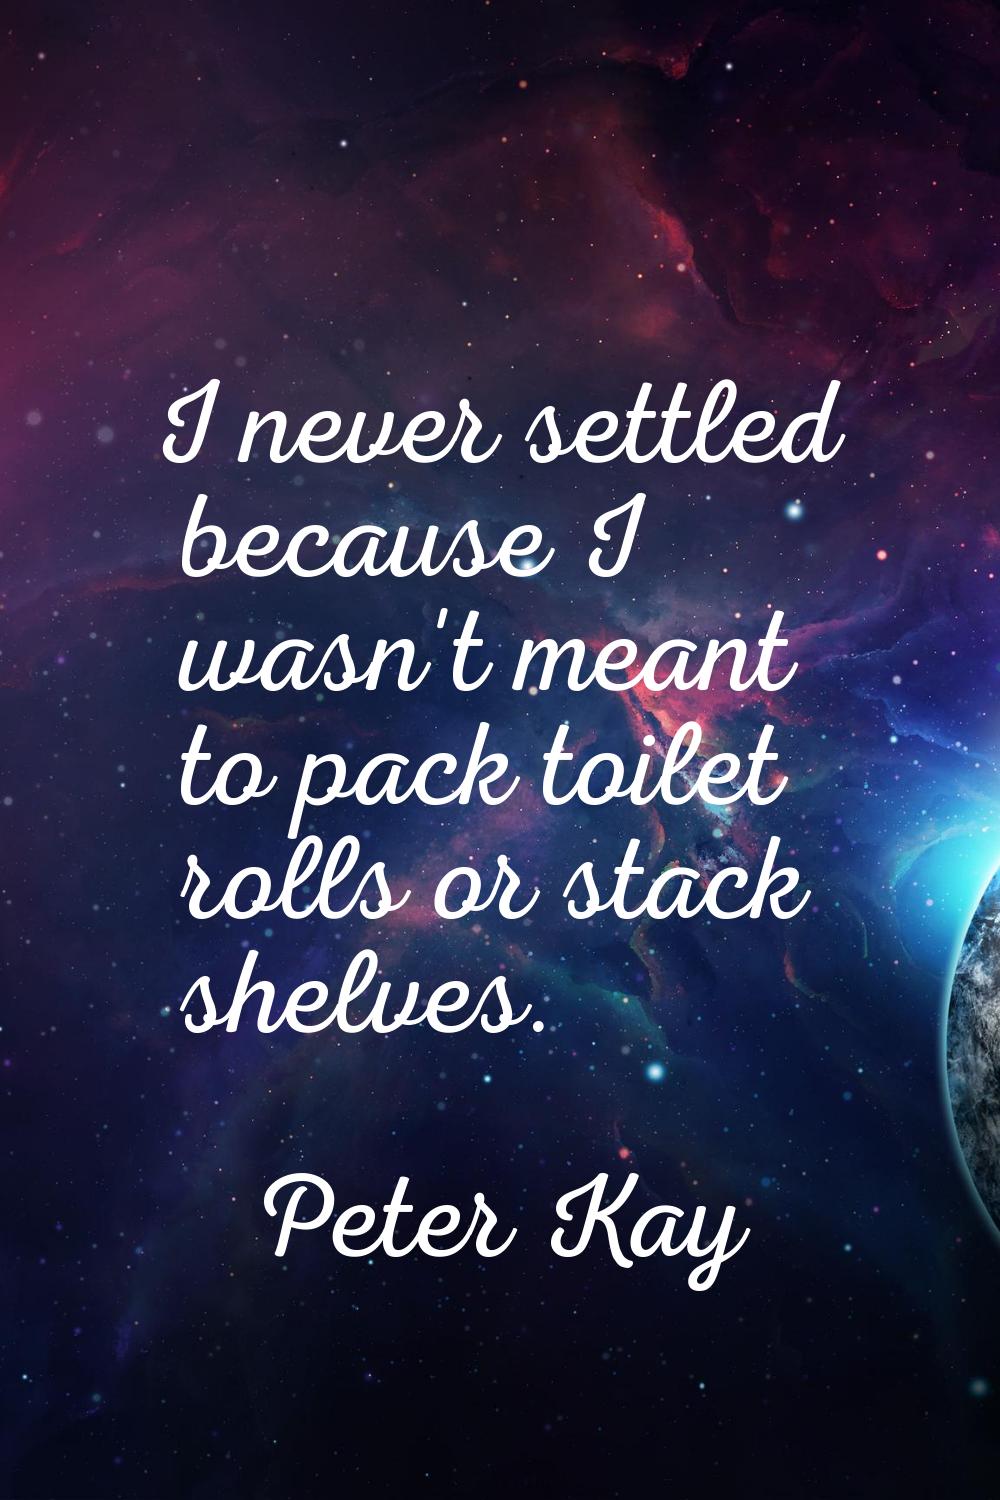 I never settled because I wasn't meant to pack toilet rolls or stack shelves.